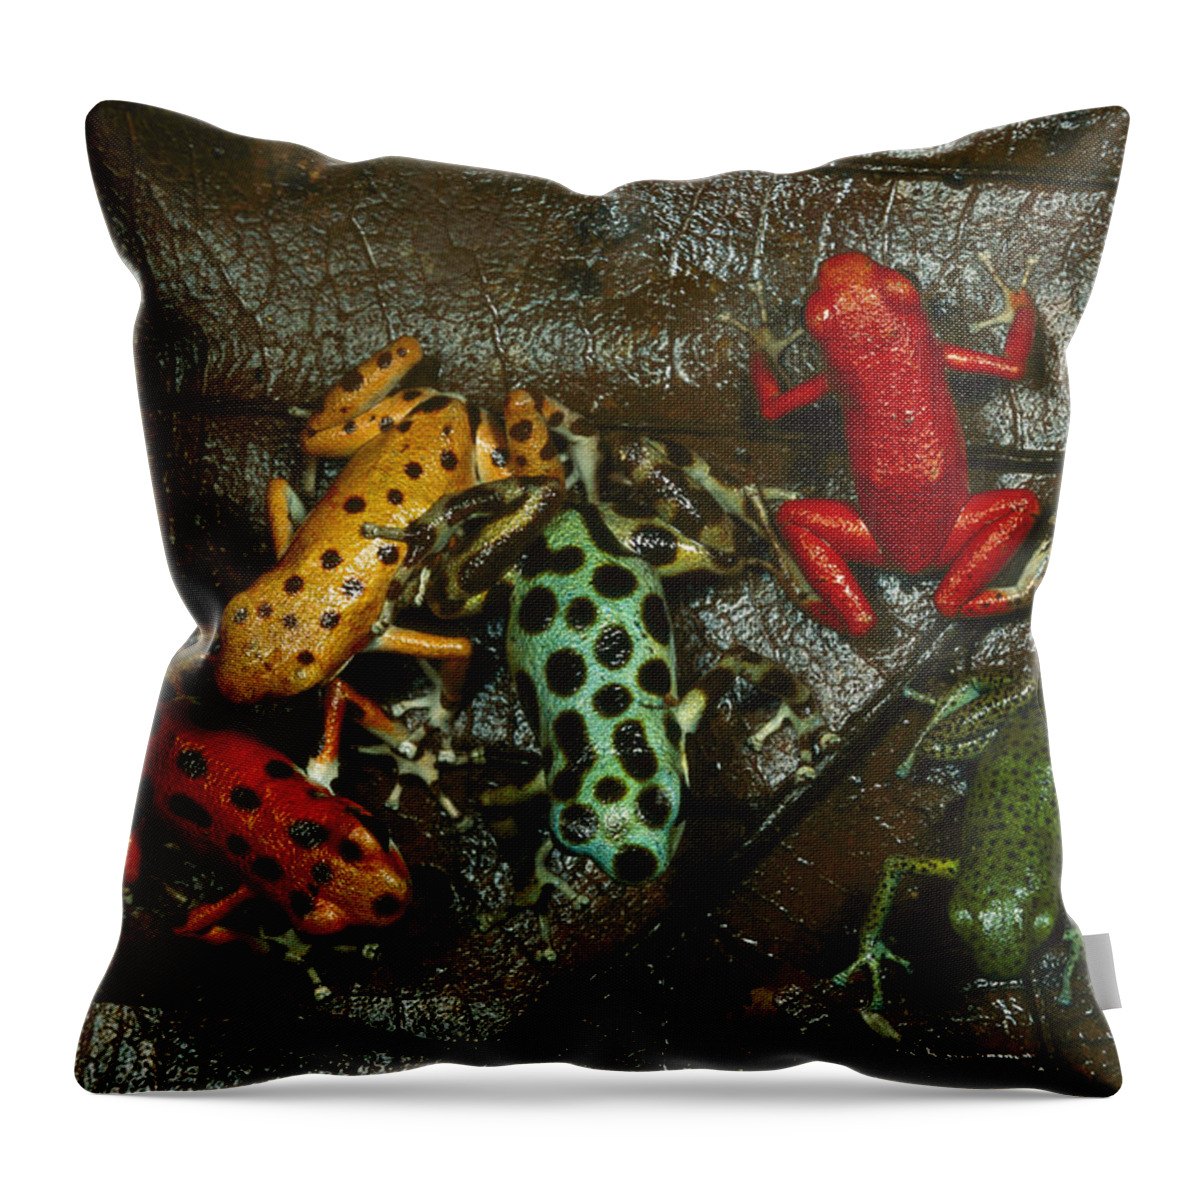 Feb0514 Throw Pillow featuring the photograph Strawberry Poison Dart Frog Colors by Mark Moffett